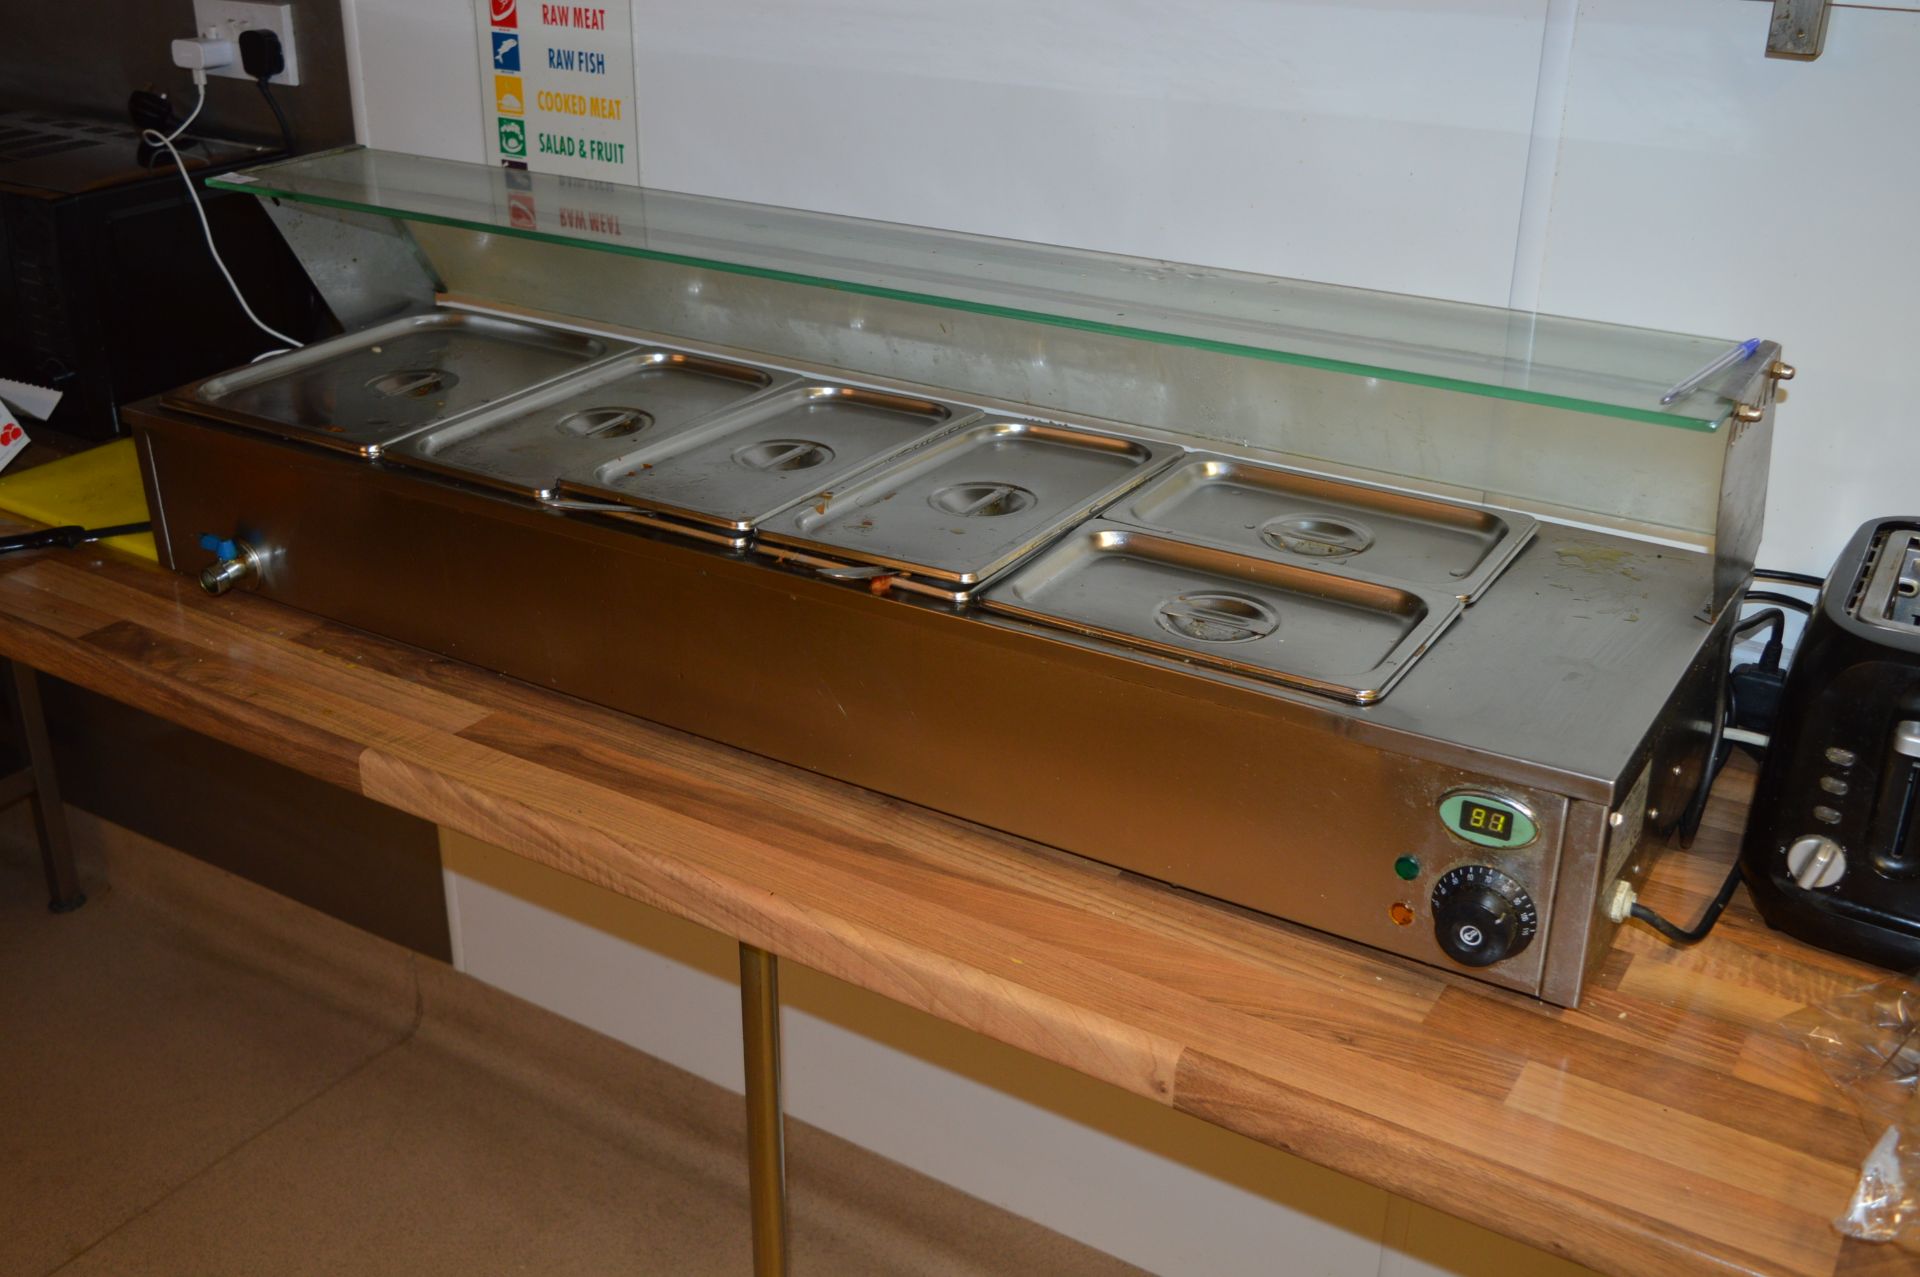 *Ace Catering Six Pot Bain Marie Unit with Glass S